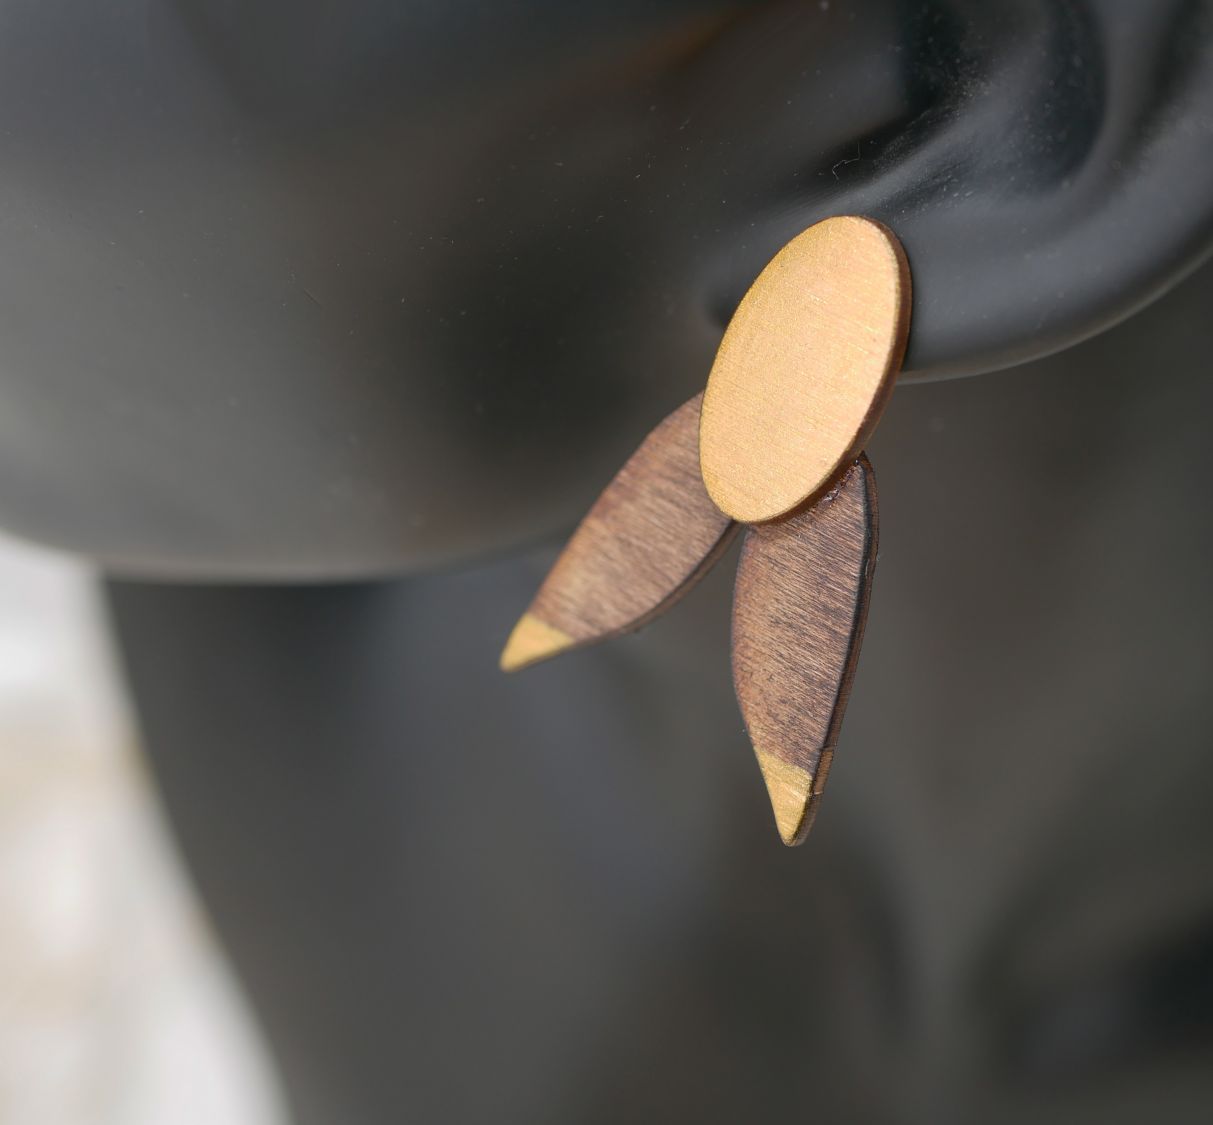 Cicada earrings in walnut wood and gilded 